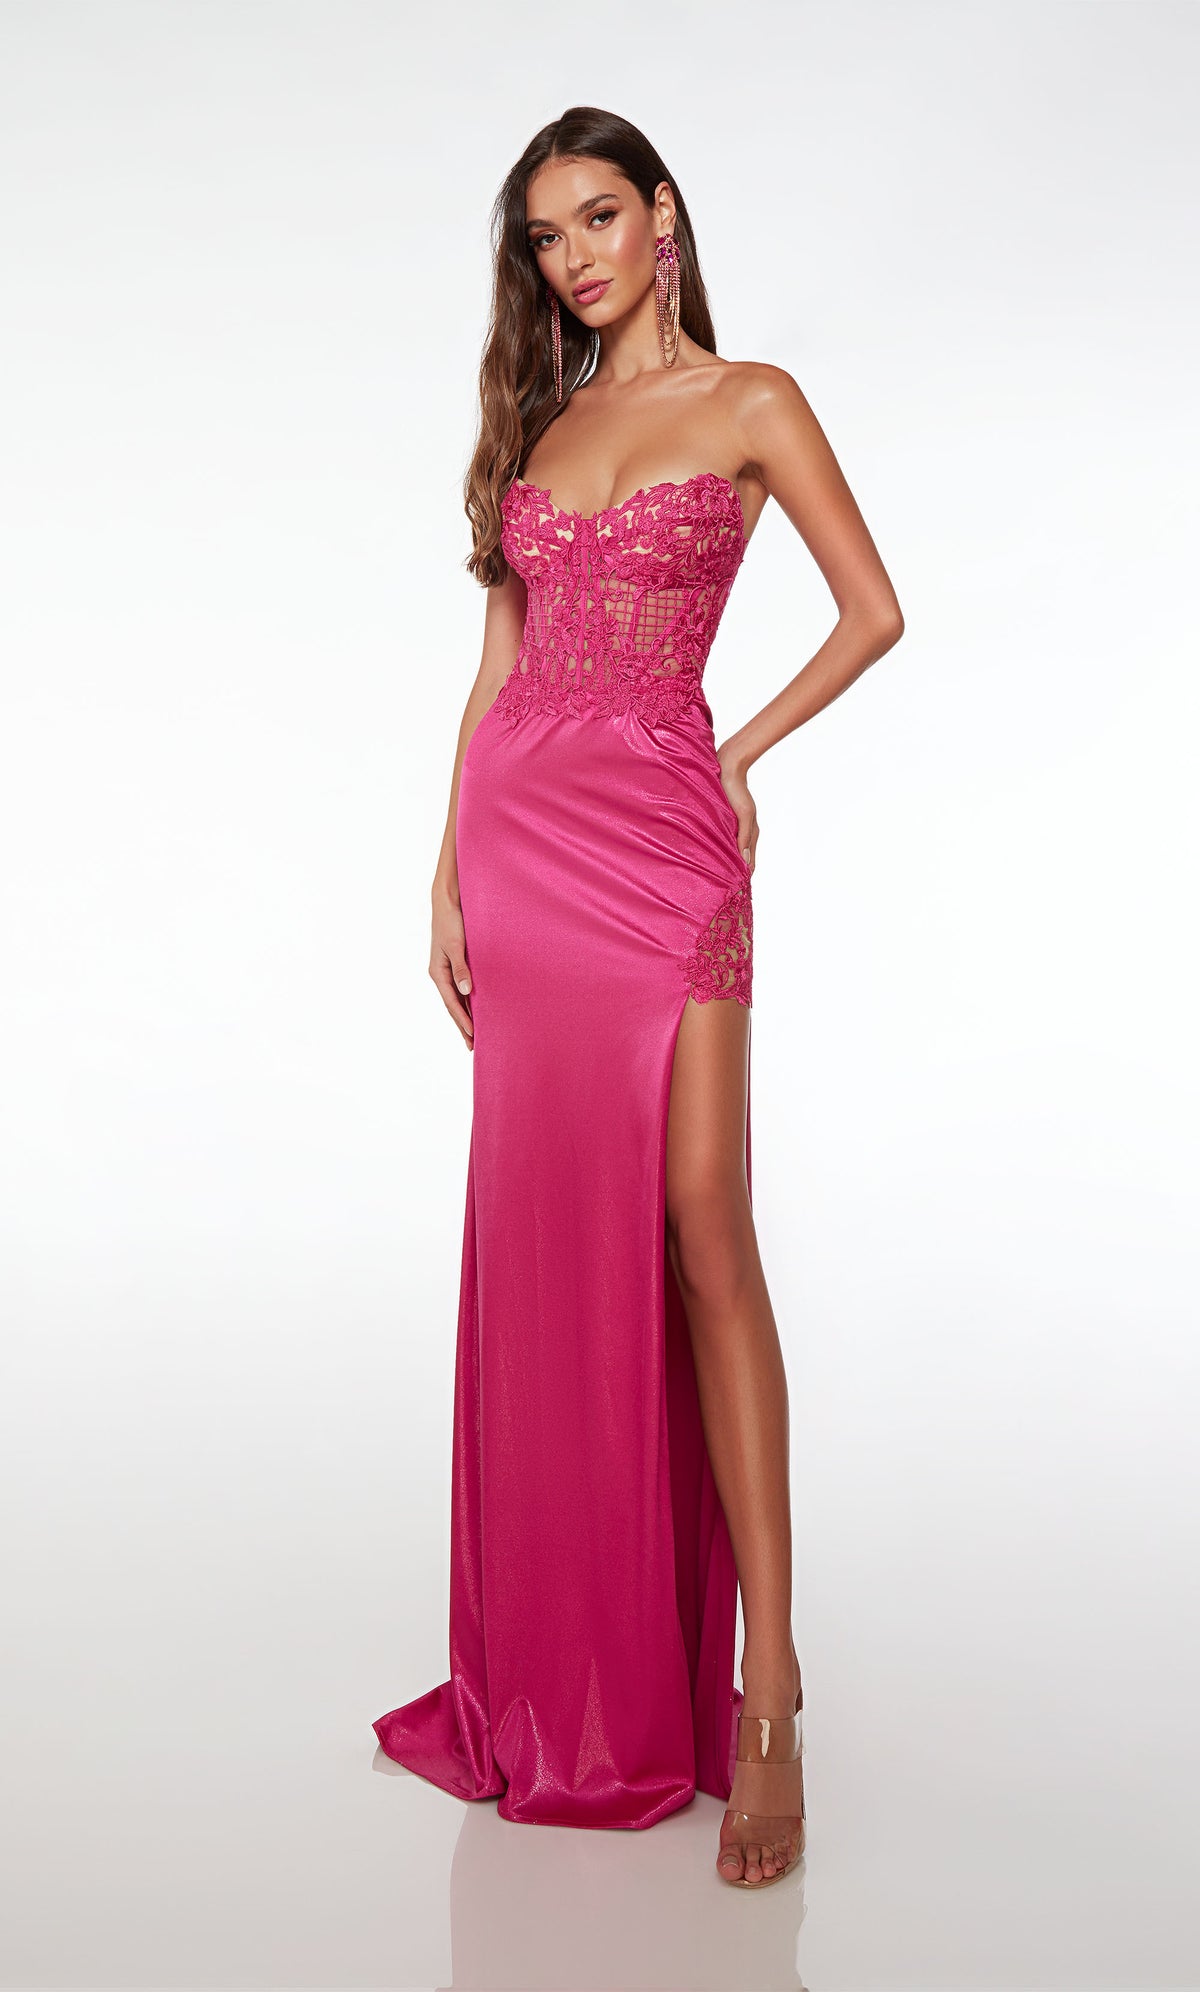 Chic strapless pink sweet 16 dress featuring an lace corset top, high side slit, and an dramatic ruffled detachable skirt for added flair.